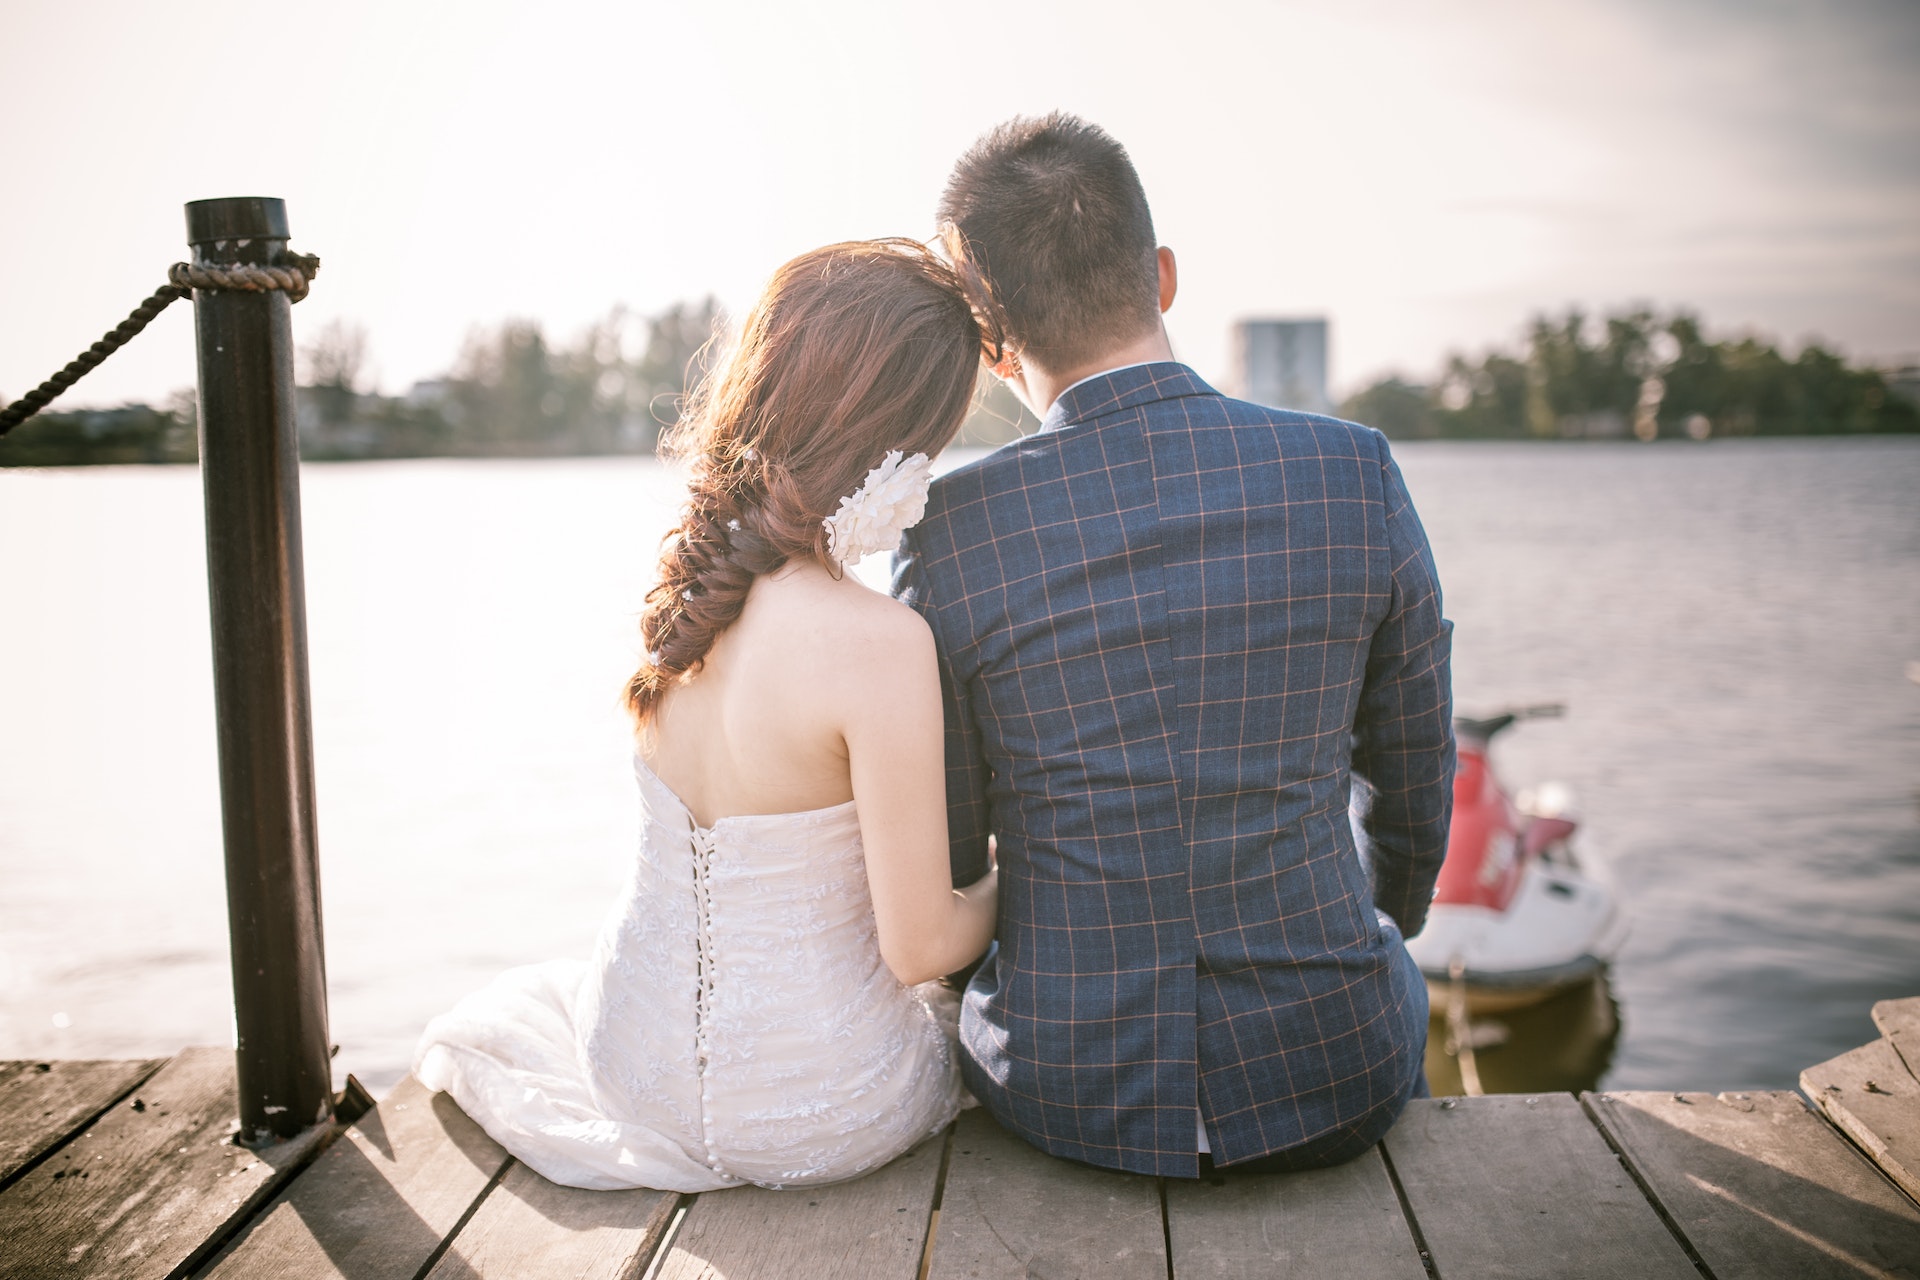 Bride and groom sitting on a dock | Source: Pexels